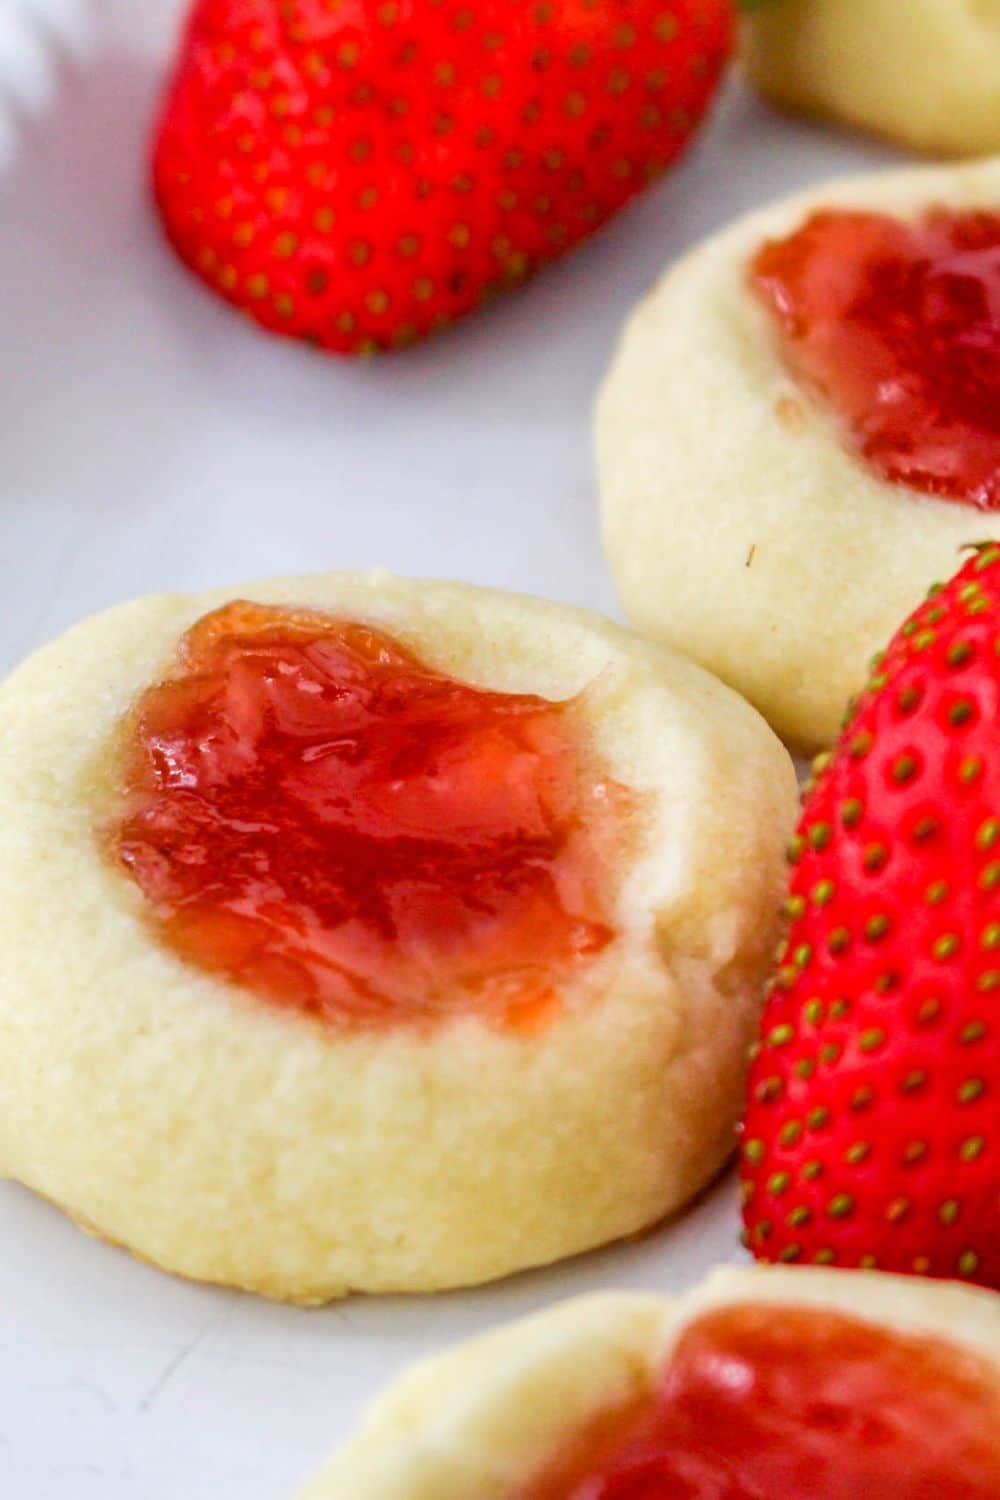 strawberries on tray with thumbprint jam cookies around the berries